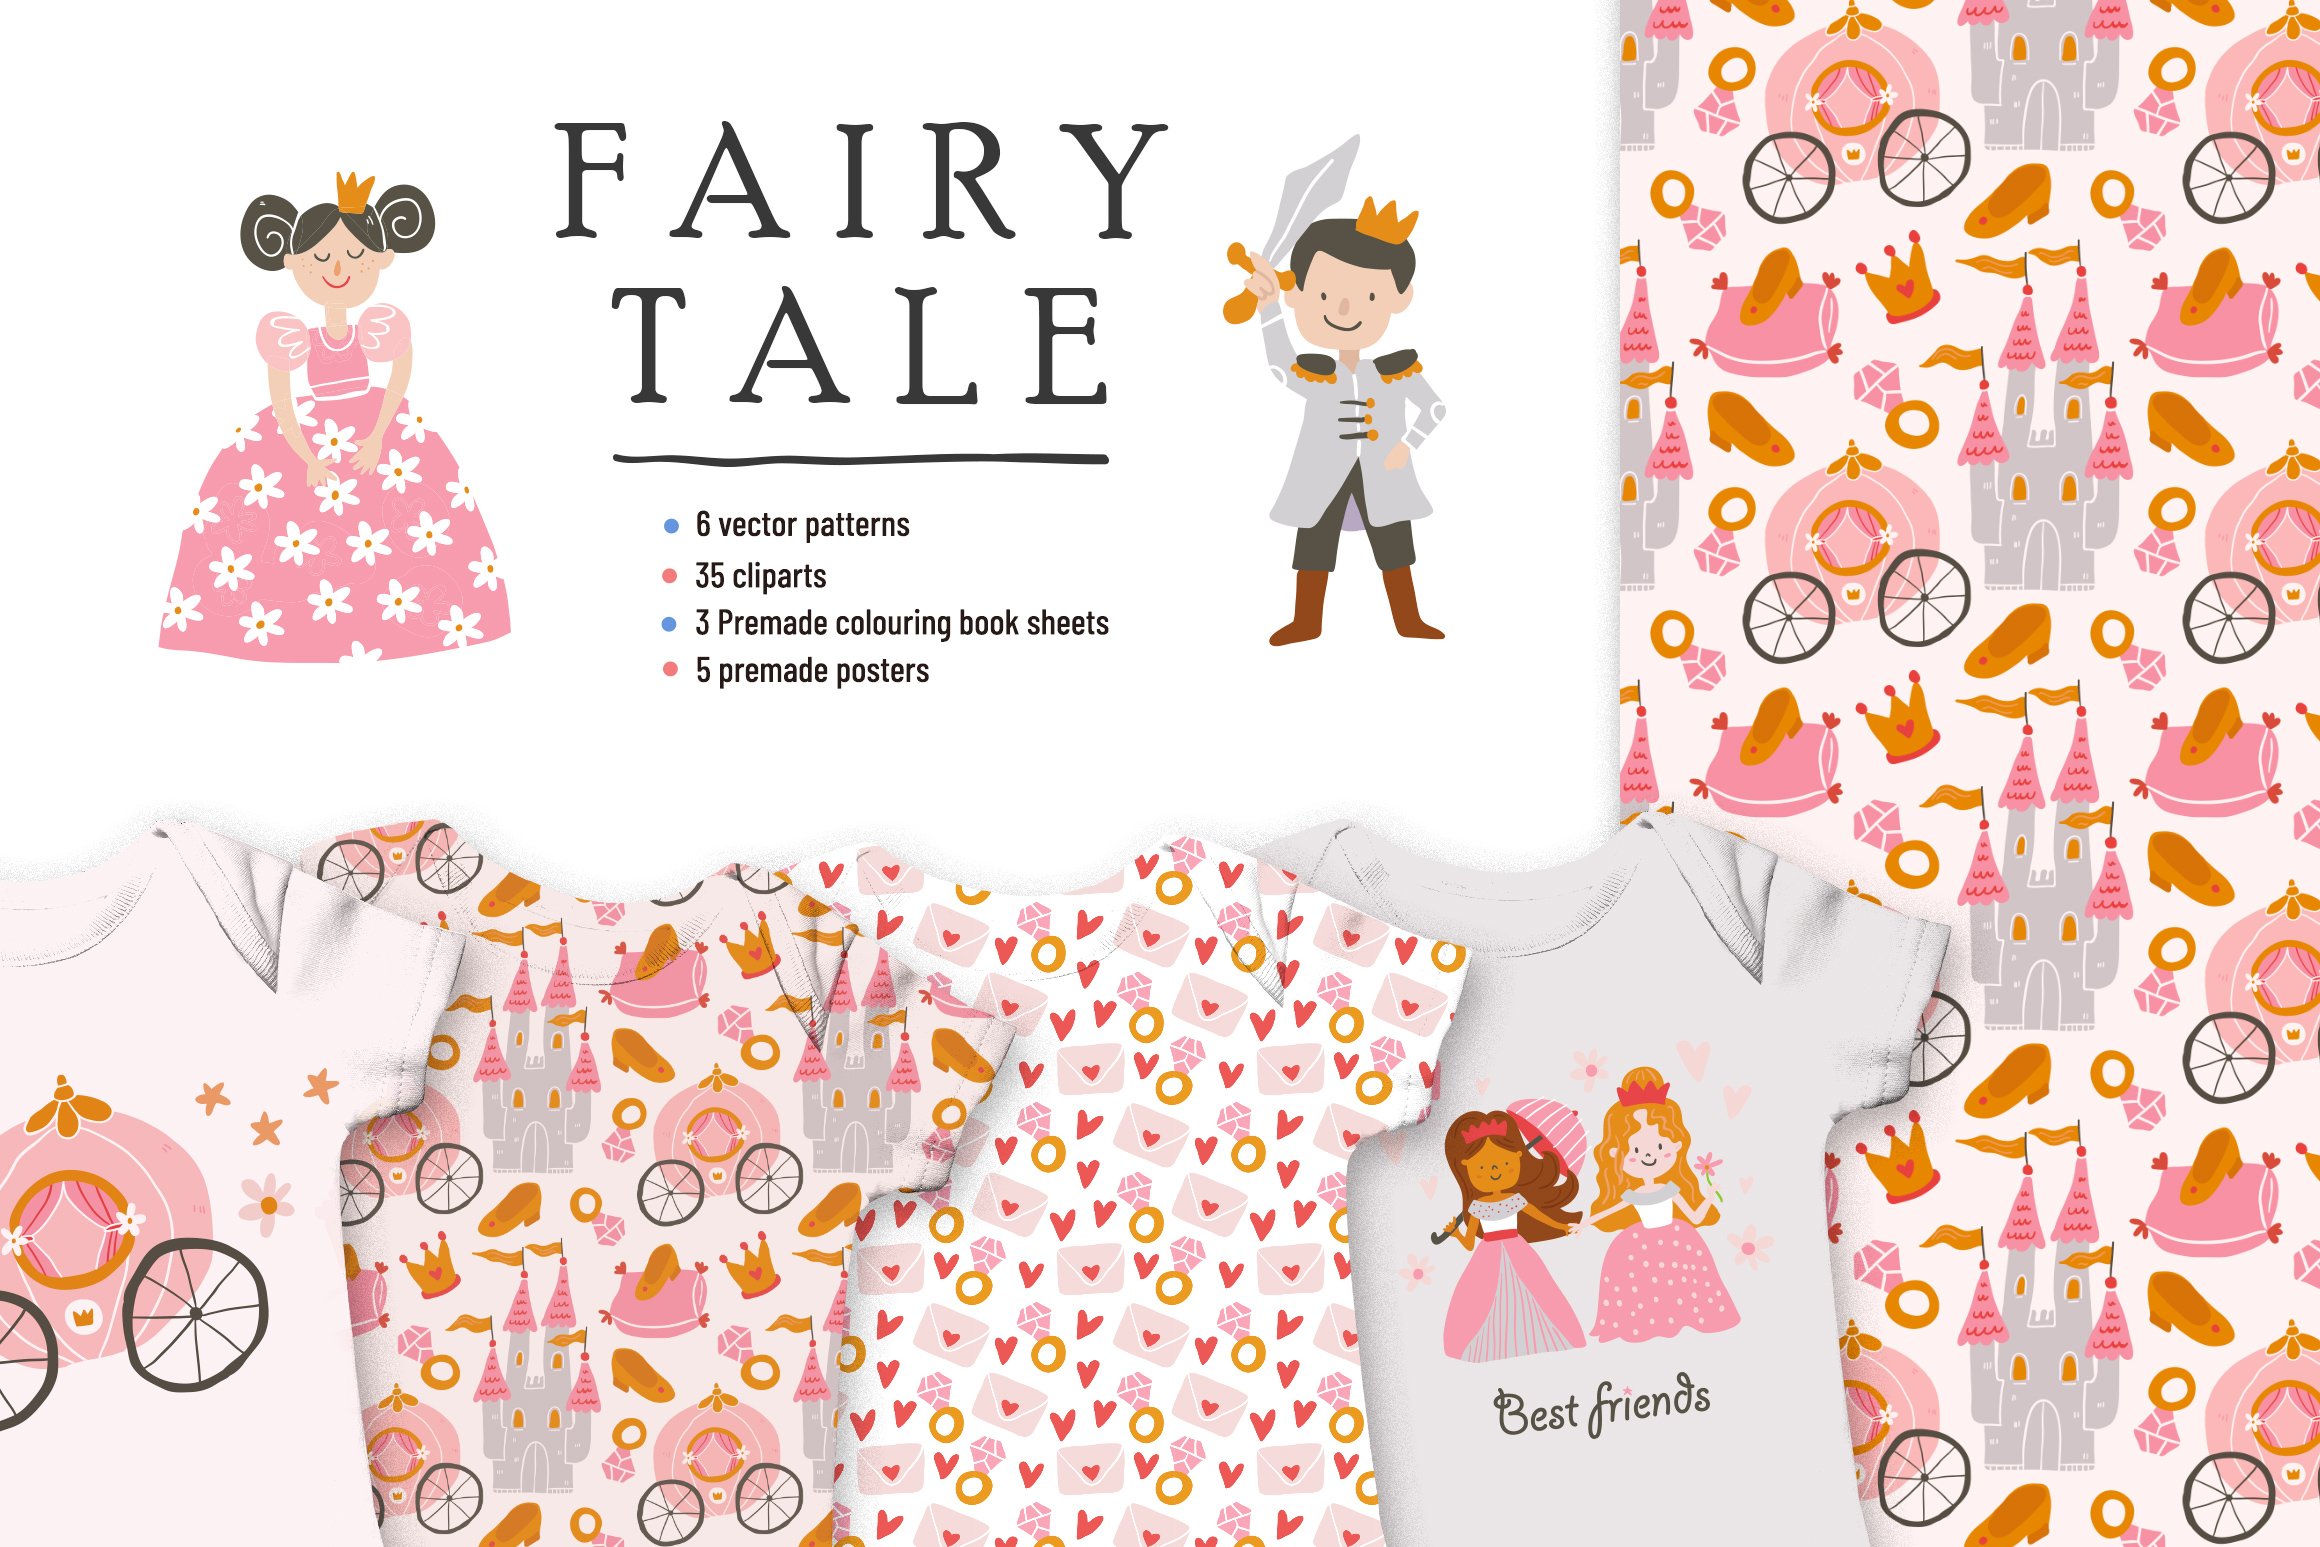 Fairy Tale Cliparts+Patterns & More cover image.